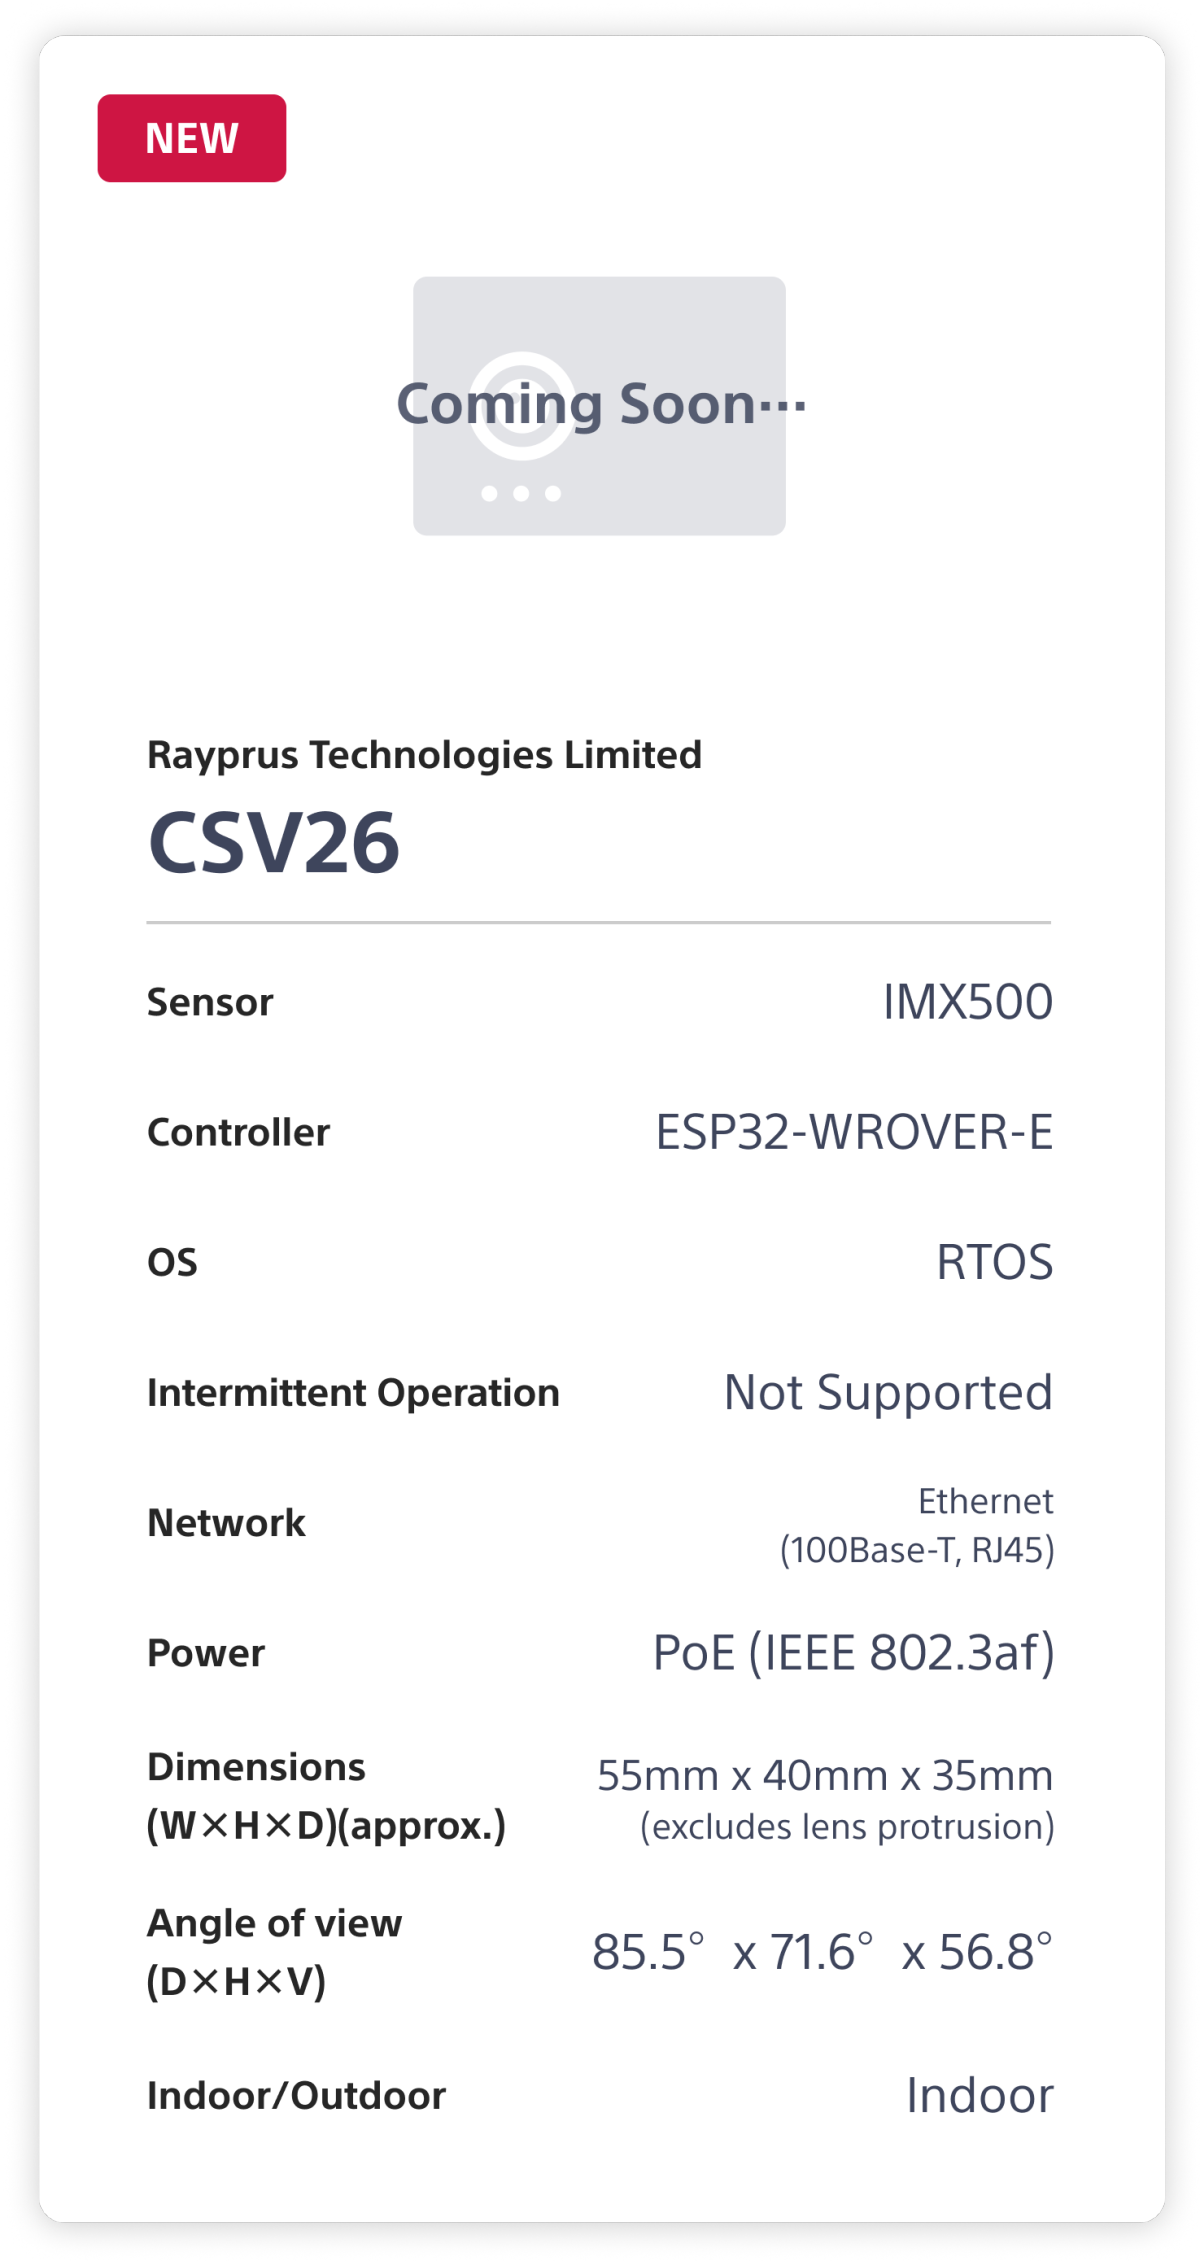 Rapyrus Technologies Limited CSV26. Sensor: IMX500. Controller: ESP32-WROVER-E. OS: RTOS. Intermittent Operation: Not Supported. Network: Ethernet (100Base-T, RJ45). Power: PoE (1EEE 802.3af). Dimensions (W×H×D)(approx.): 55mm x 40mm x 35mm (excludes lens protrusion). Angle of view (D×H×V): 85.5°x 71.6°x 56.8°. Indoor/Outdoor: Indoor.